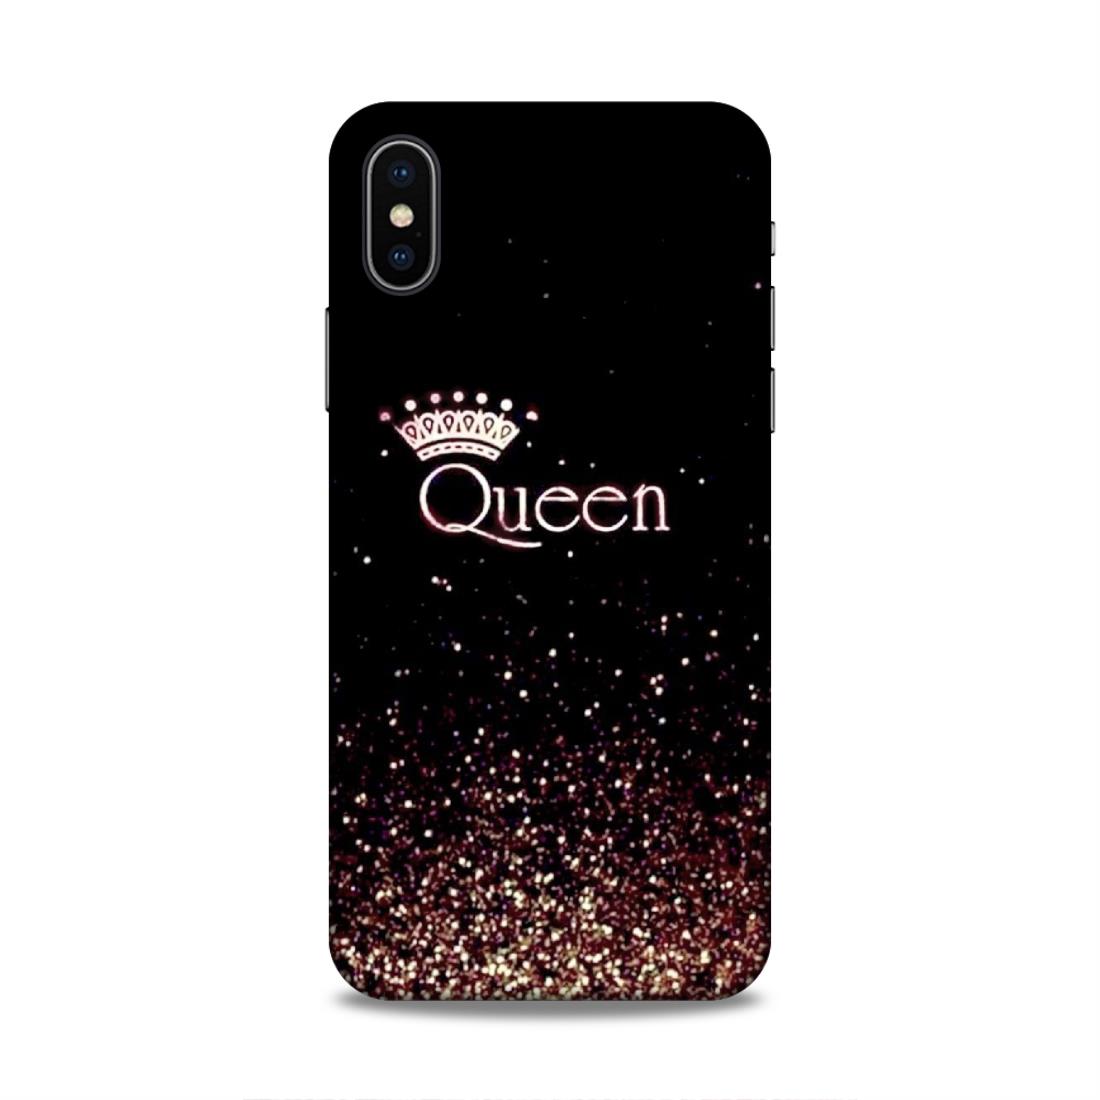 Queen Wirh Crown Hard Back Case For Apple iPhone X/XS